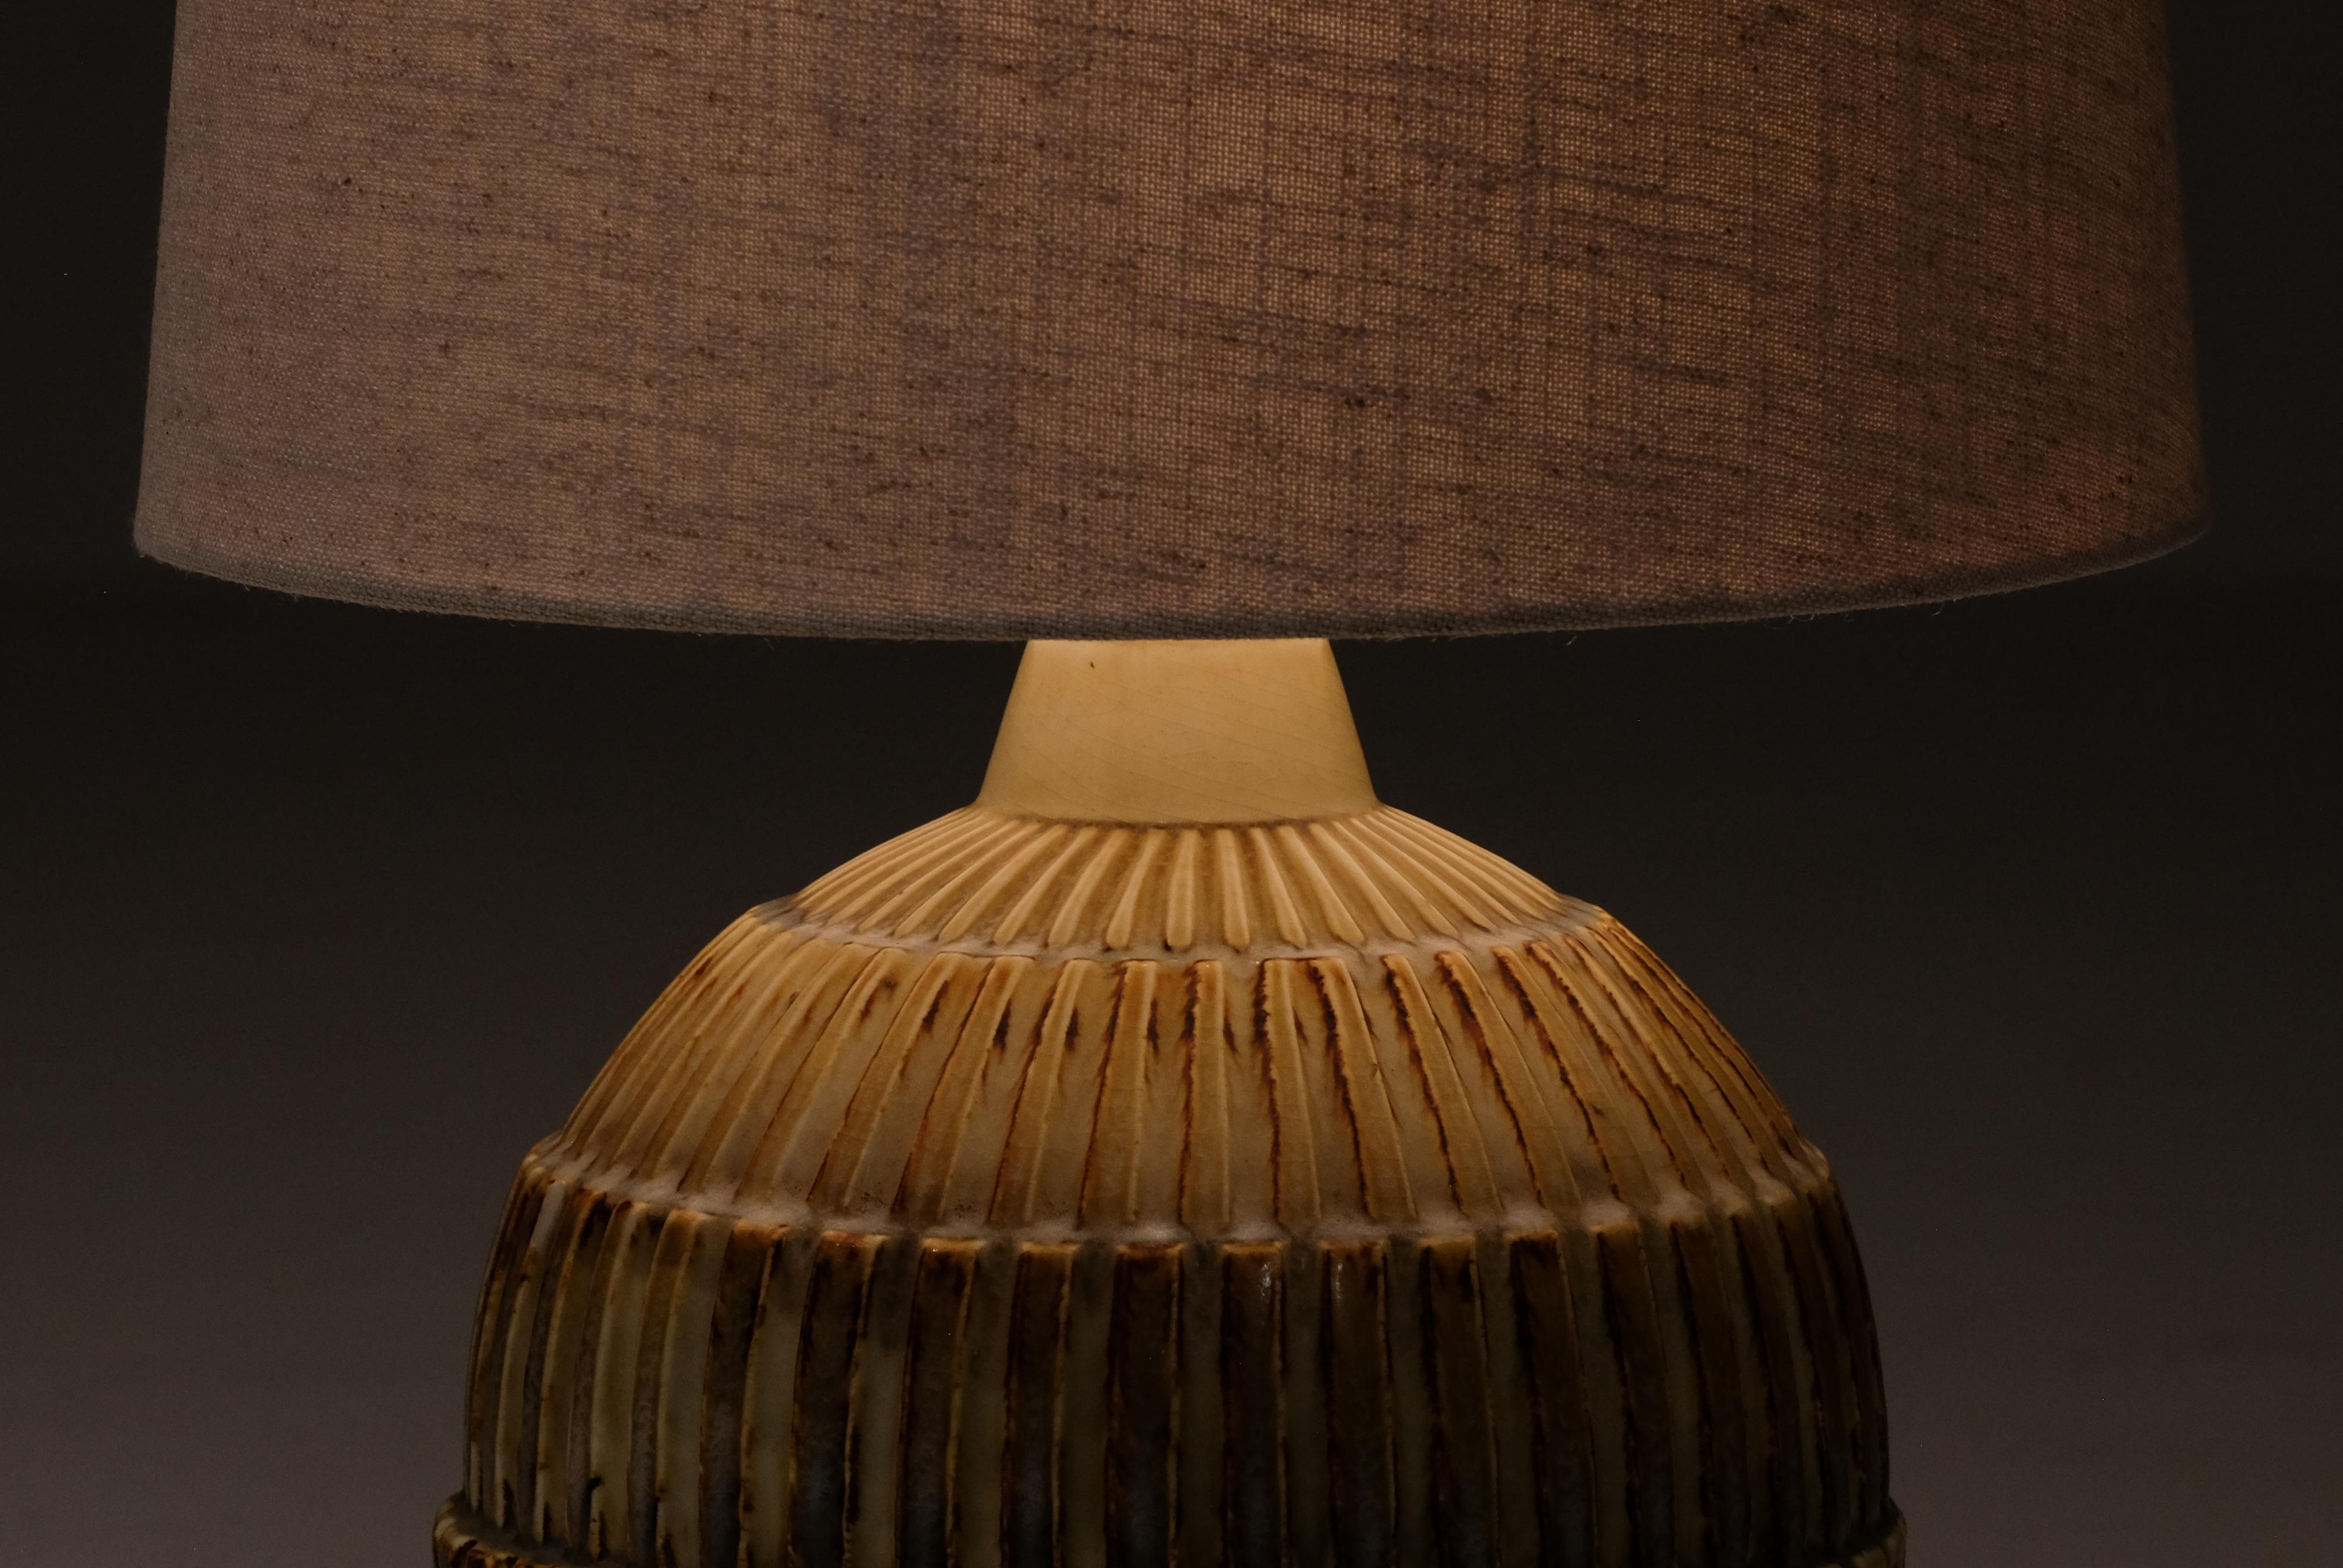 Ceramic table lamp by Gertrud Lonegren in golden glaze and a highly textured surface. 

Measurement (with lampshade)
Diameter: 35 cm
Height: 56 cm

Lonegren studied in Vienna and Stockholm during the 1920s, she worked at Upsala-Ekeby in the